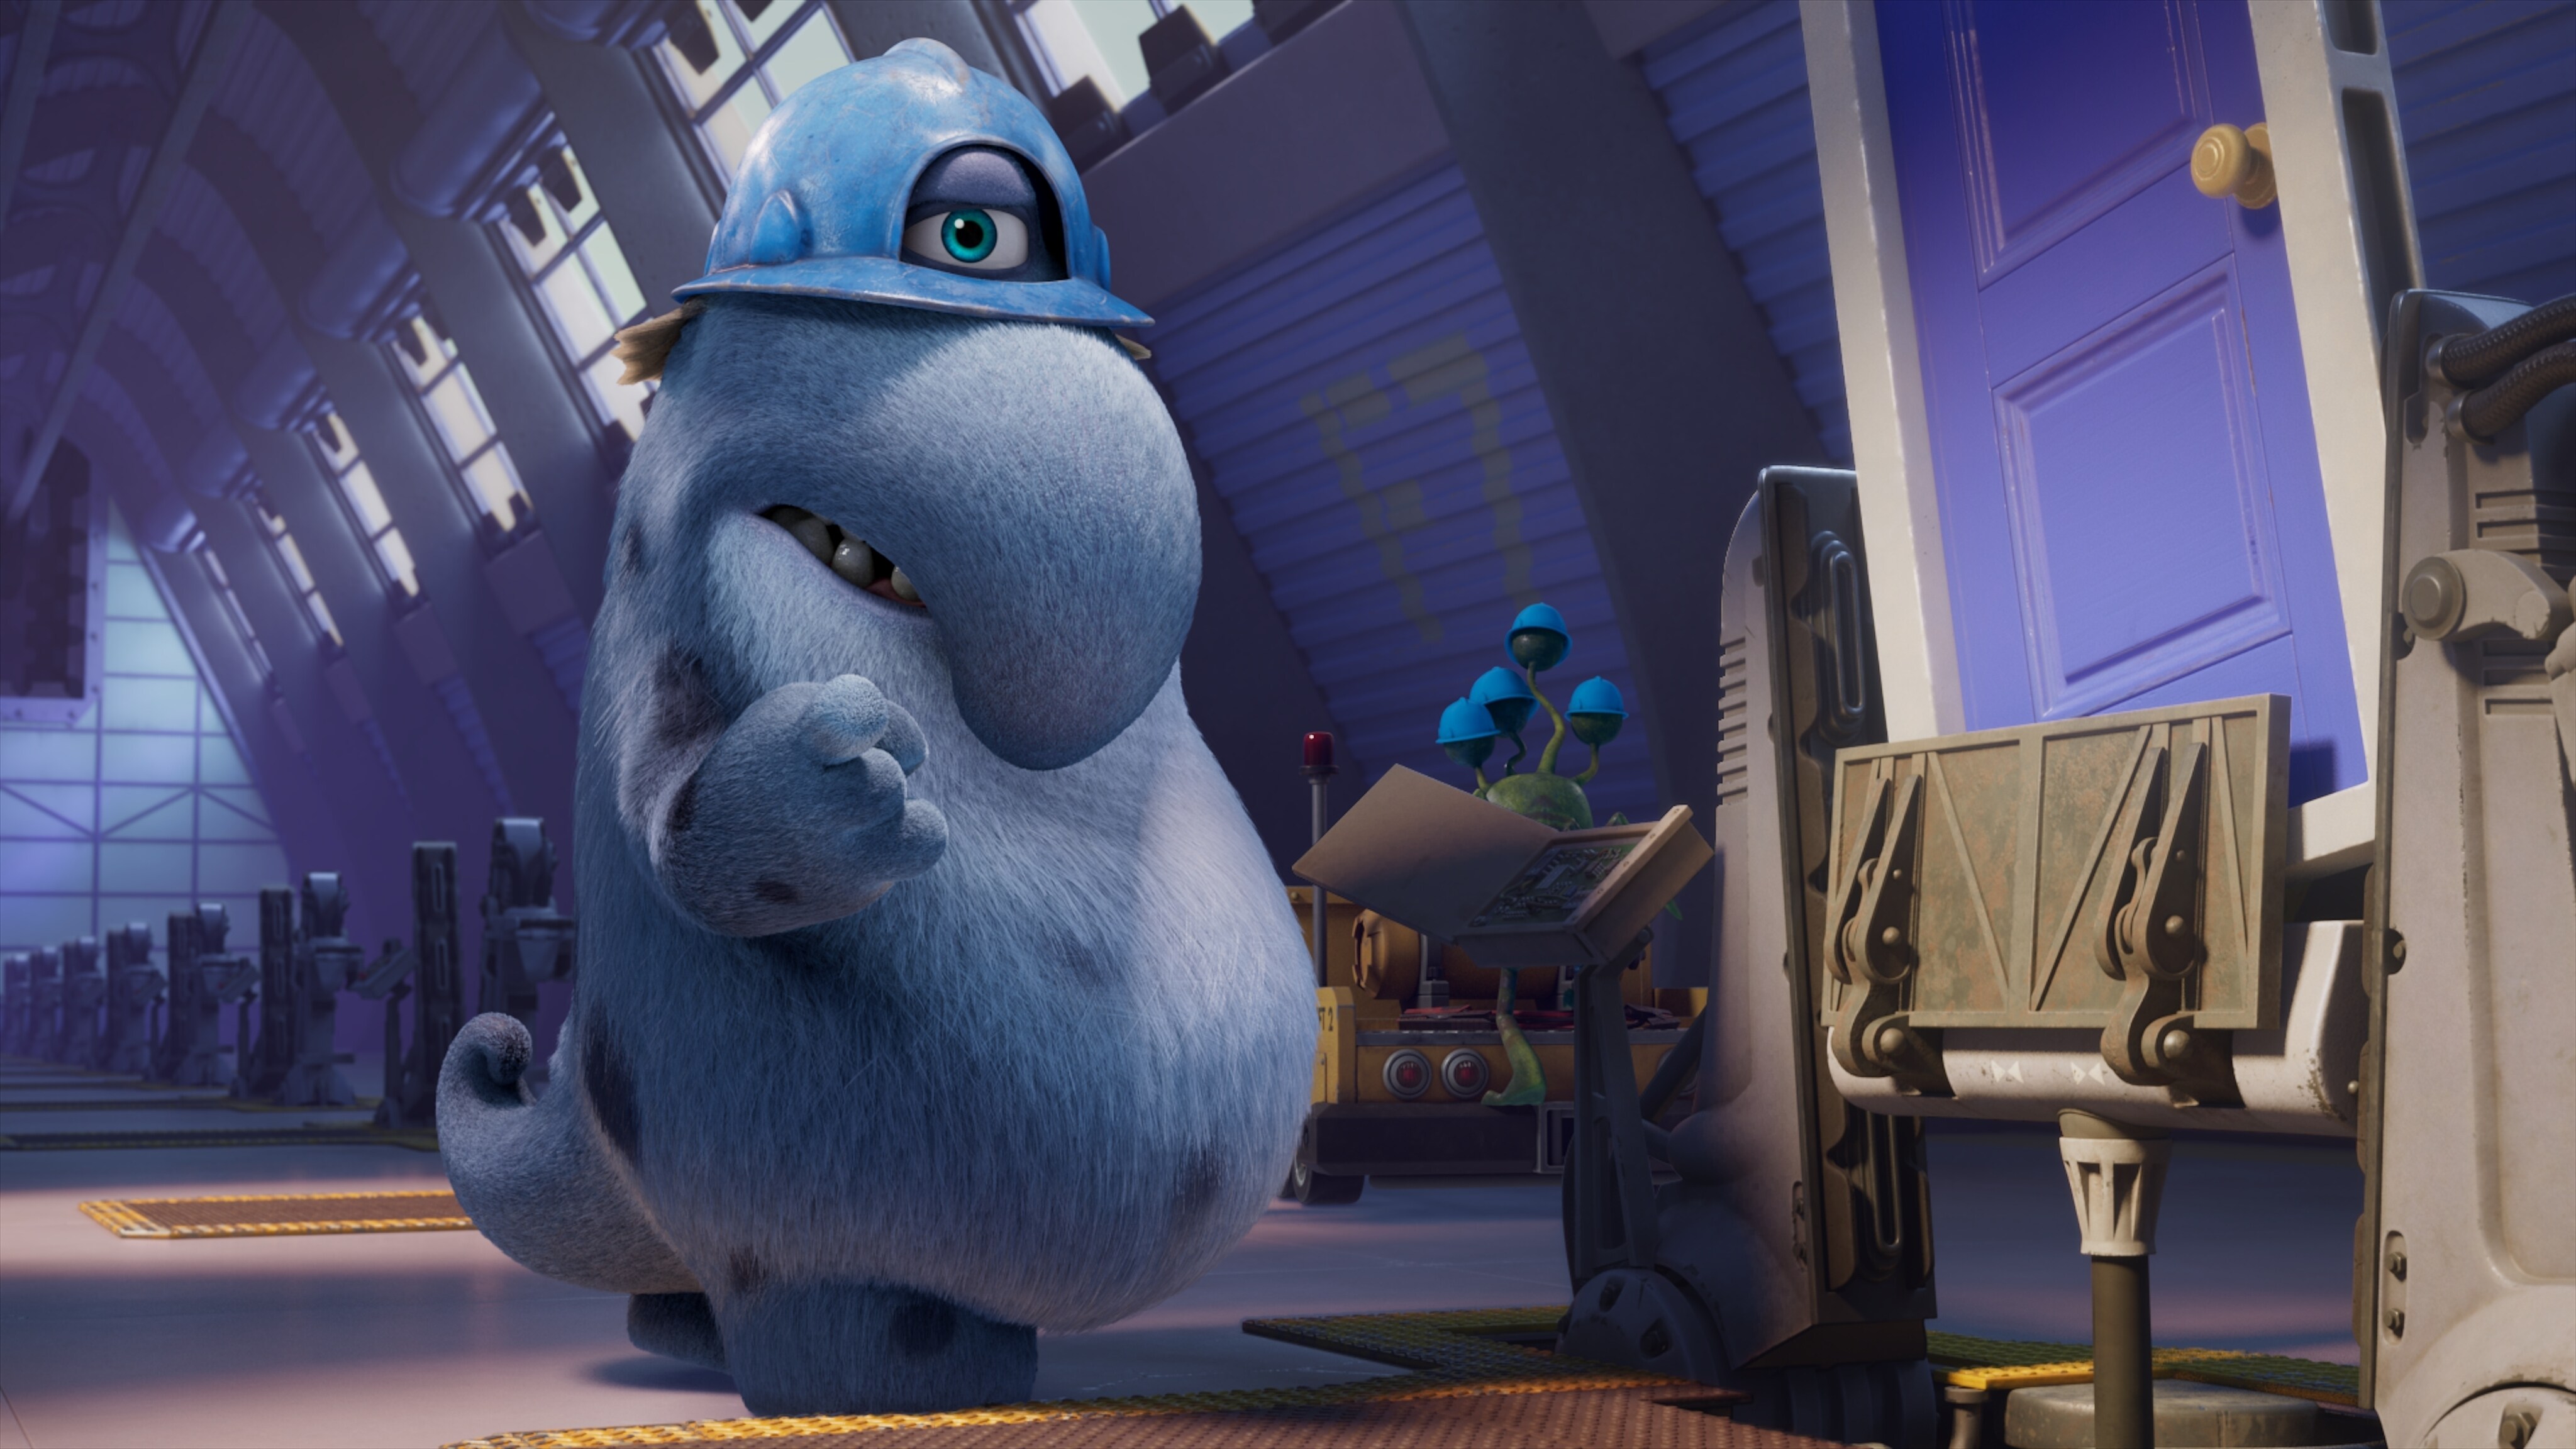 MONSTERS AT WORK - "Meet Mift" - When Tylor is initiated into MIFT during a bizarre ritual, he wants nothing more than to get away from his odd coworkers.  But when an emergency strikes Monsters, Inc., MIFT kicks into action and Tylor develops a hint of respect for the misfit team. (Disney) FRITZ